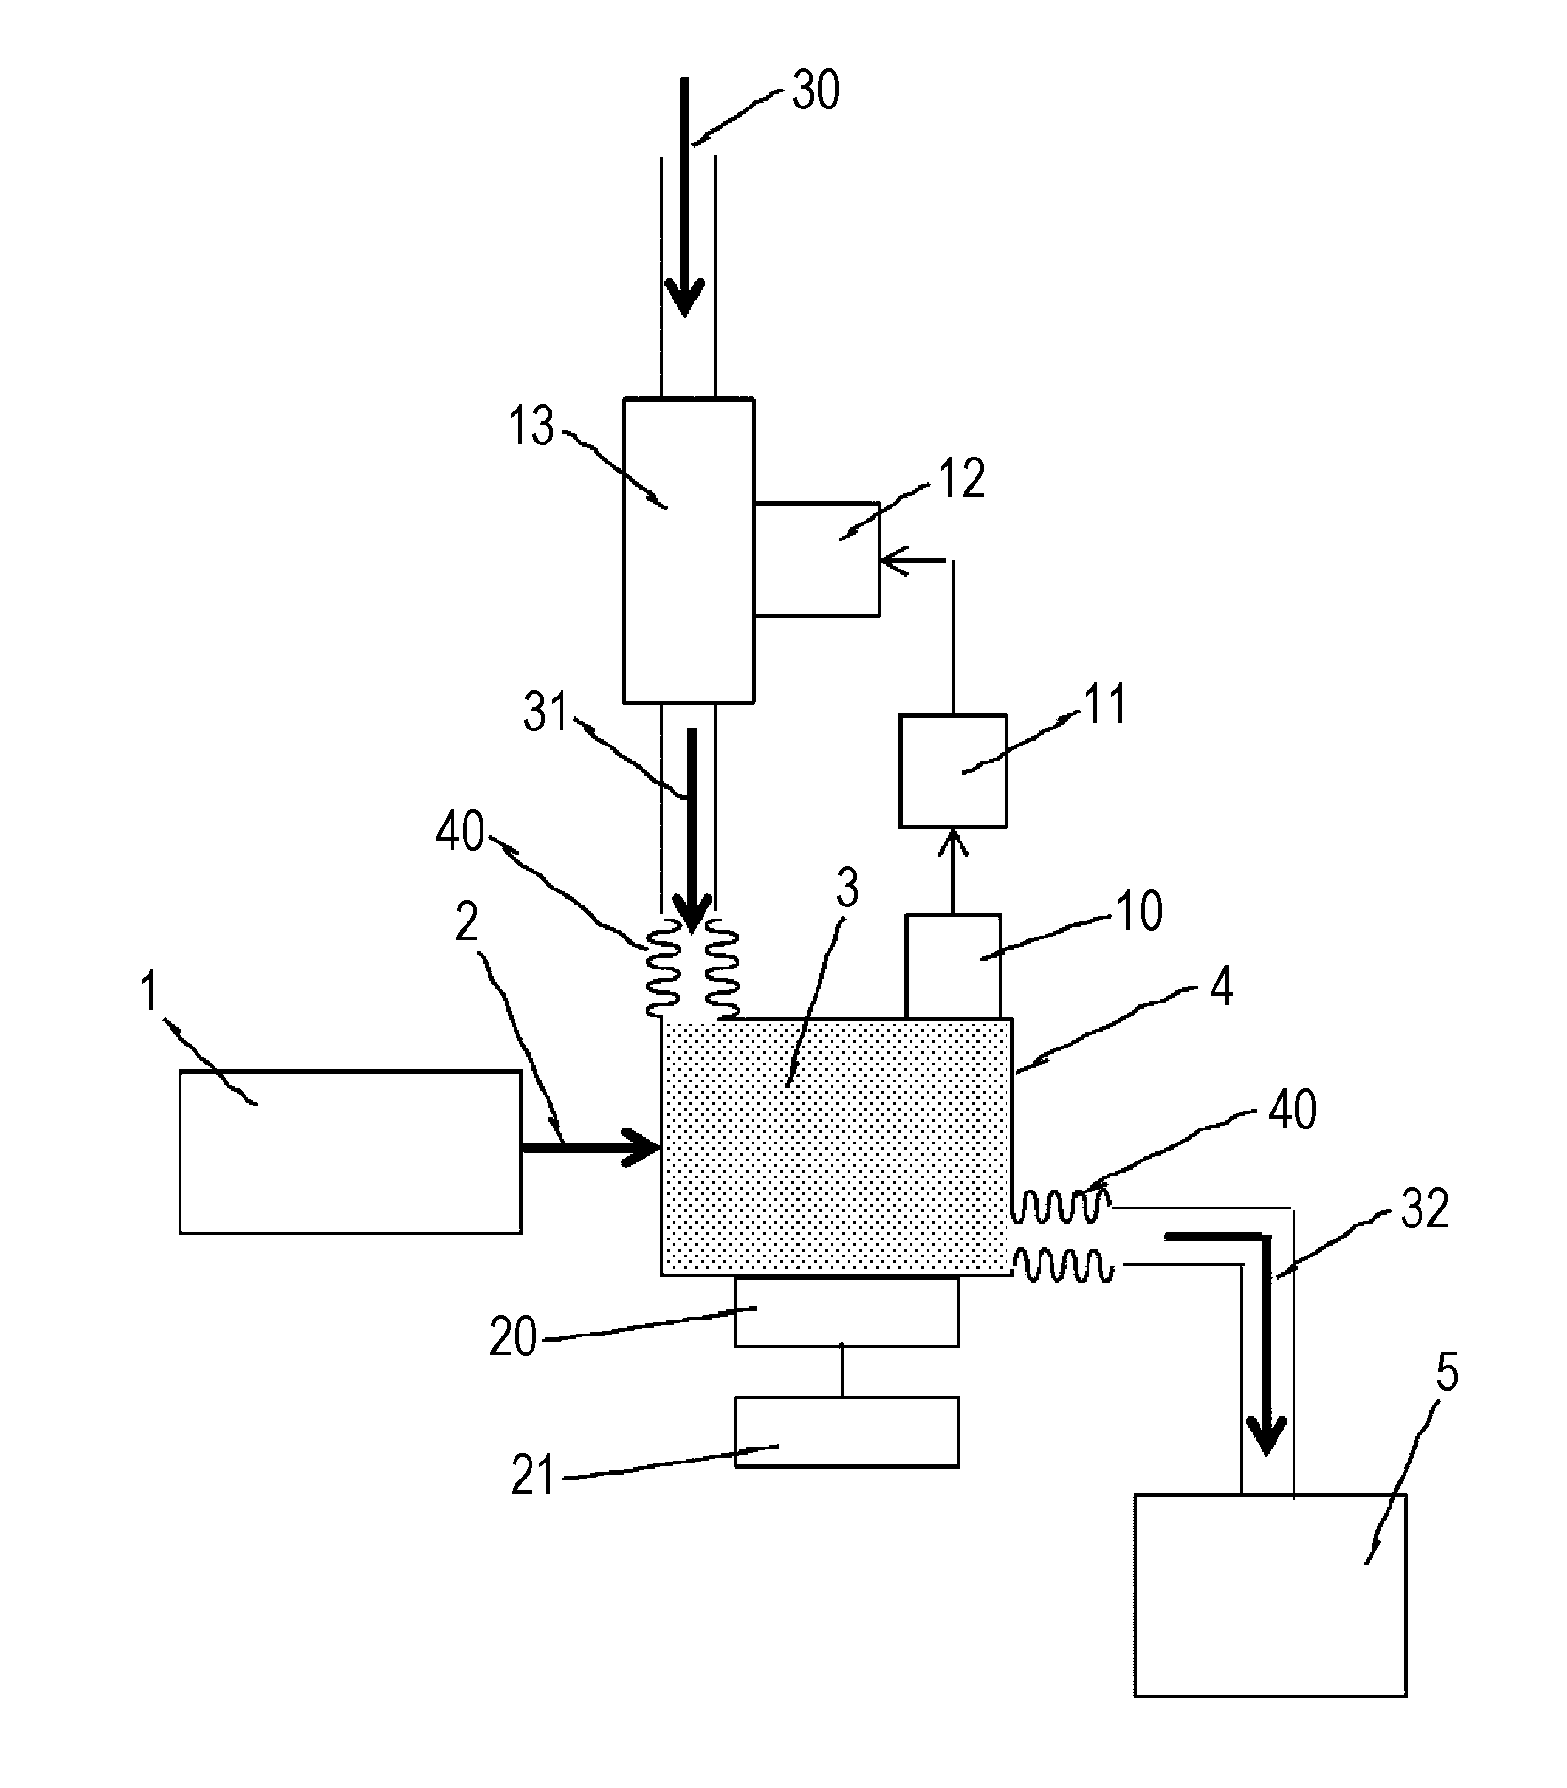 Method and apparatus for producing radionuclide